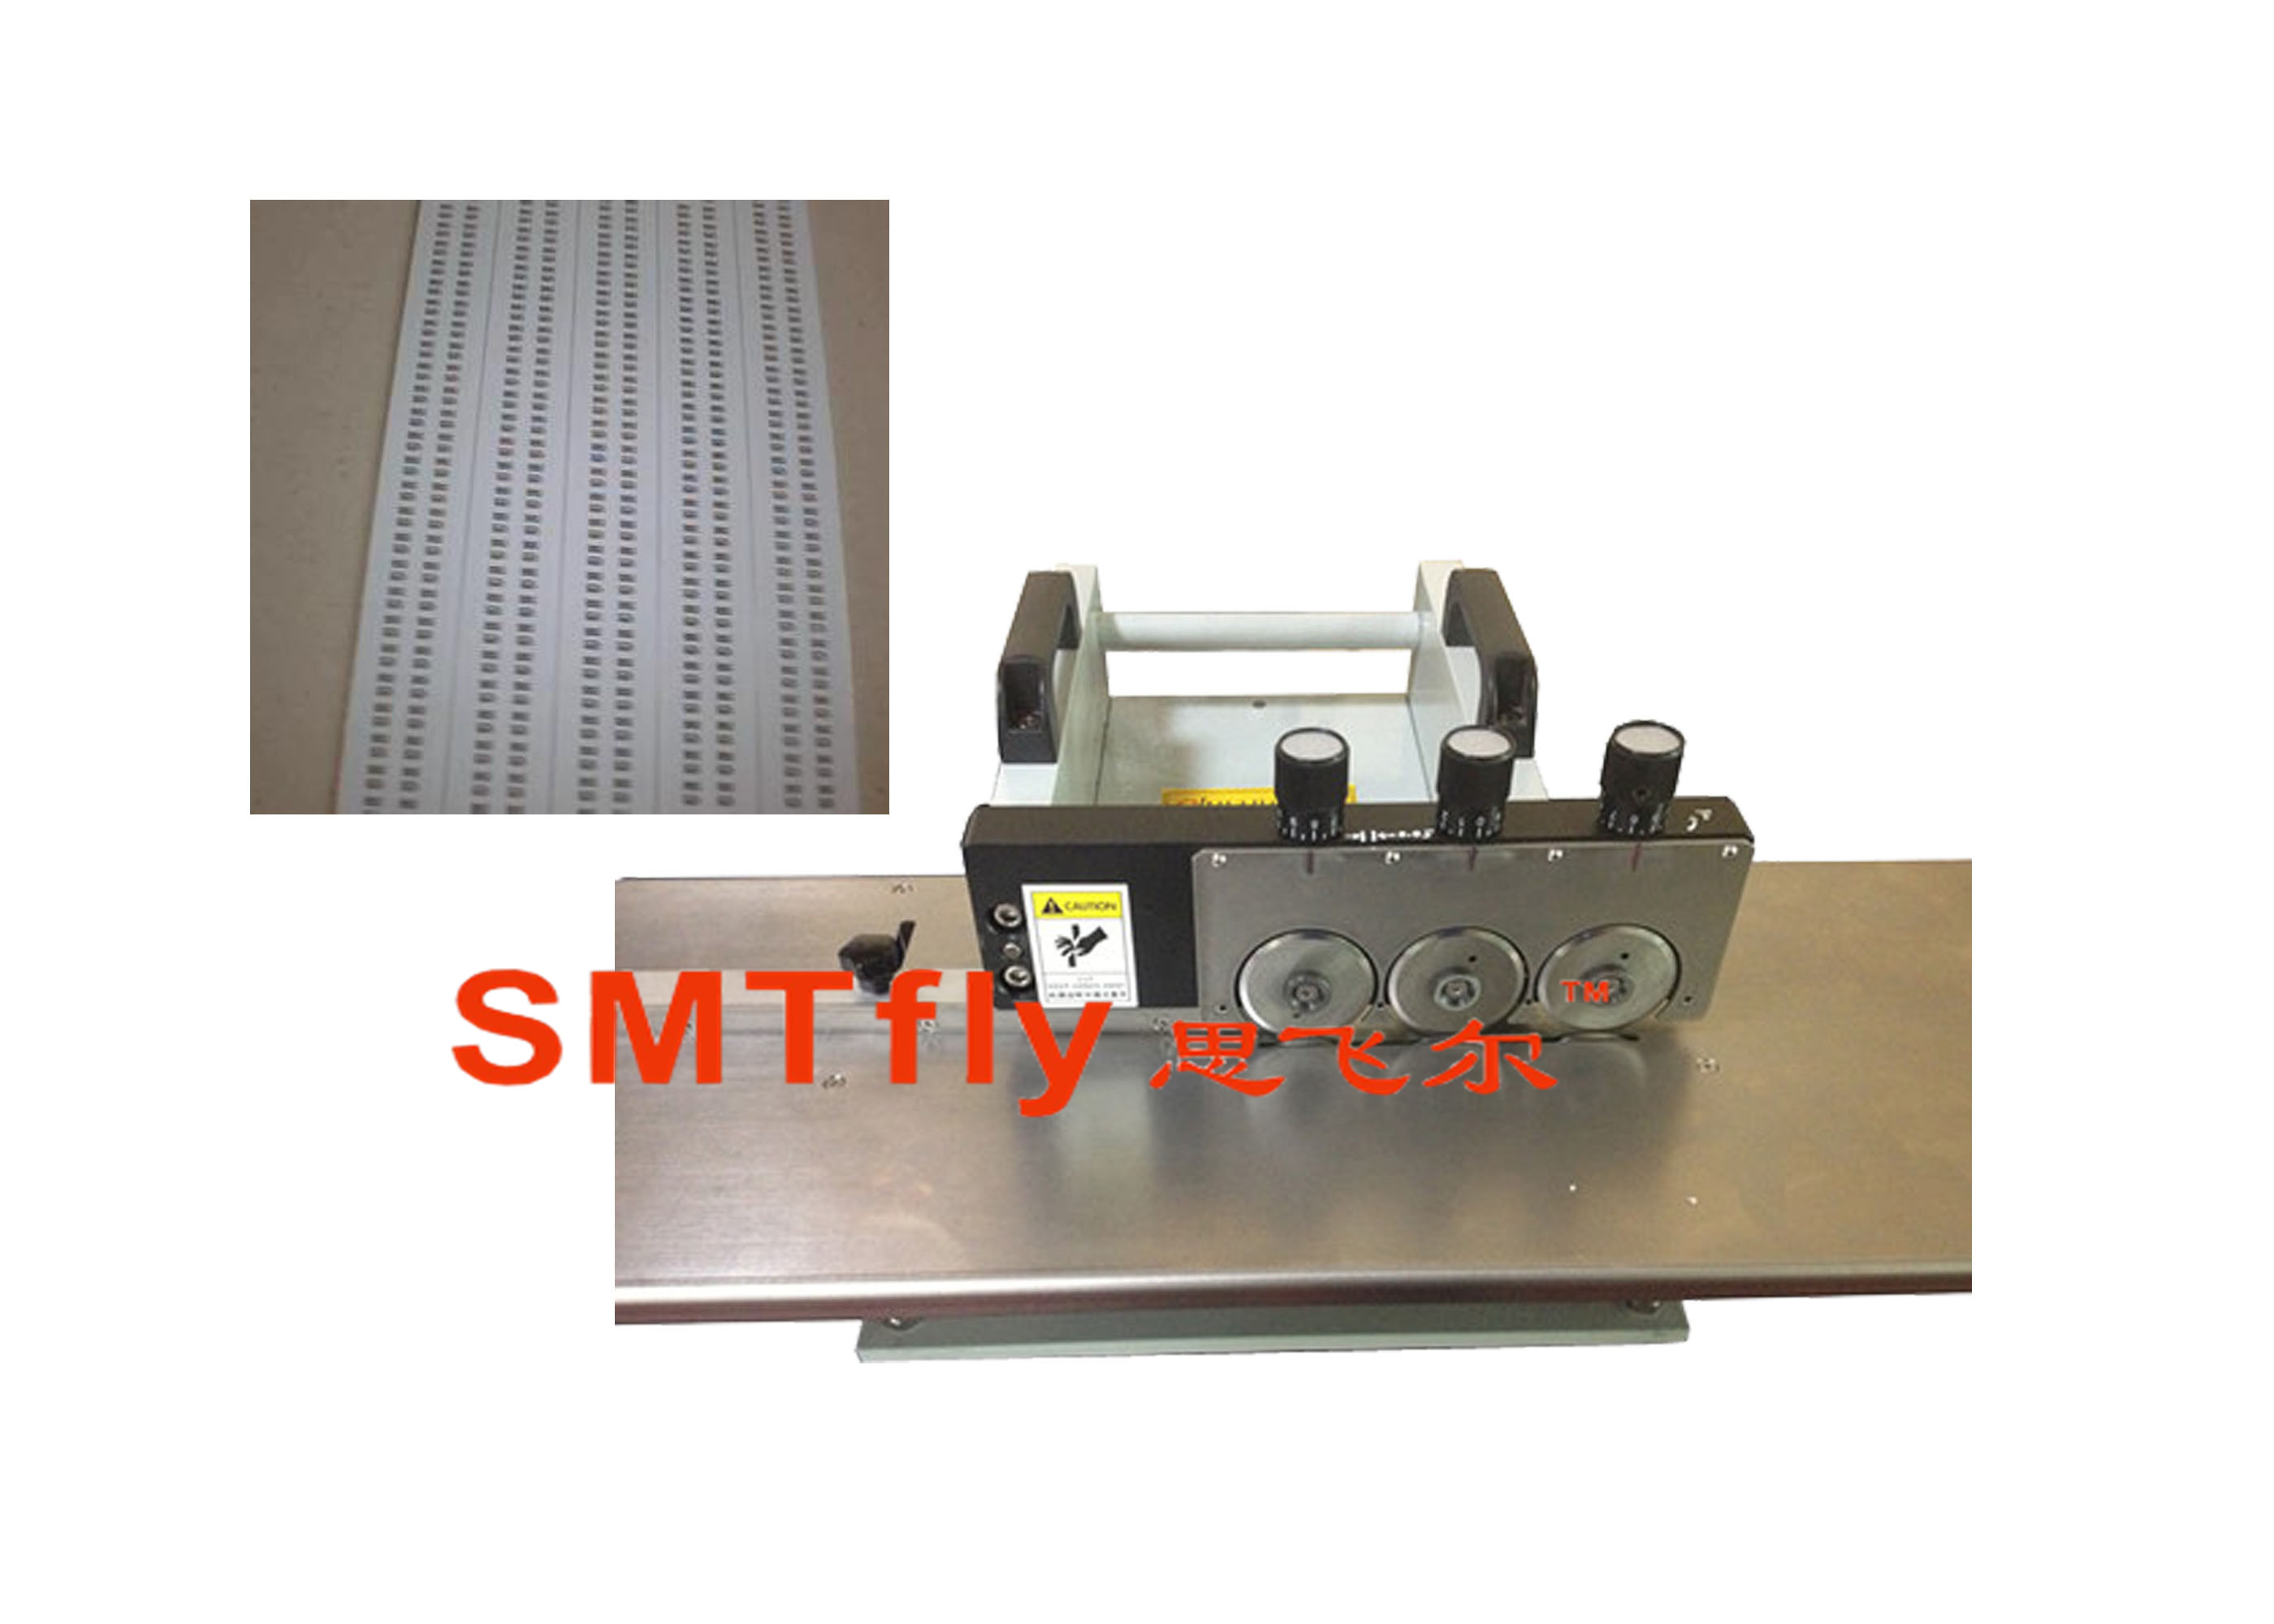 PCB Depanelling for Aluminum Boards,SMTfly-3S